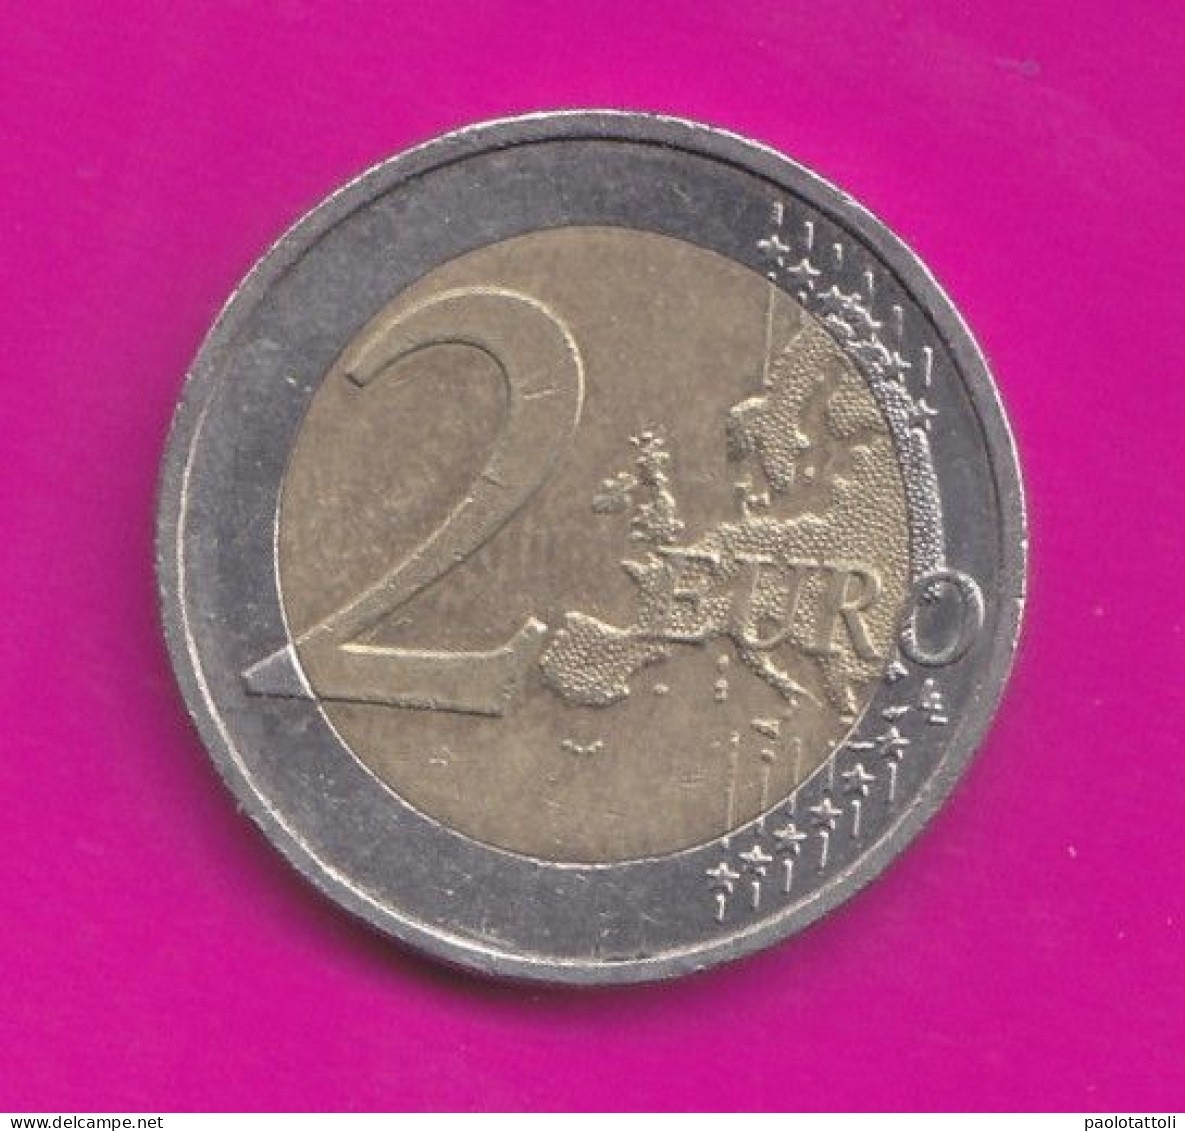 Germany, 2022-Mint Munich (D)- 2 Euro Commemorative- Obverse  Thurningen. Reverse Map Of Western Europe- - Allemagne